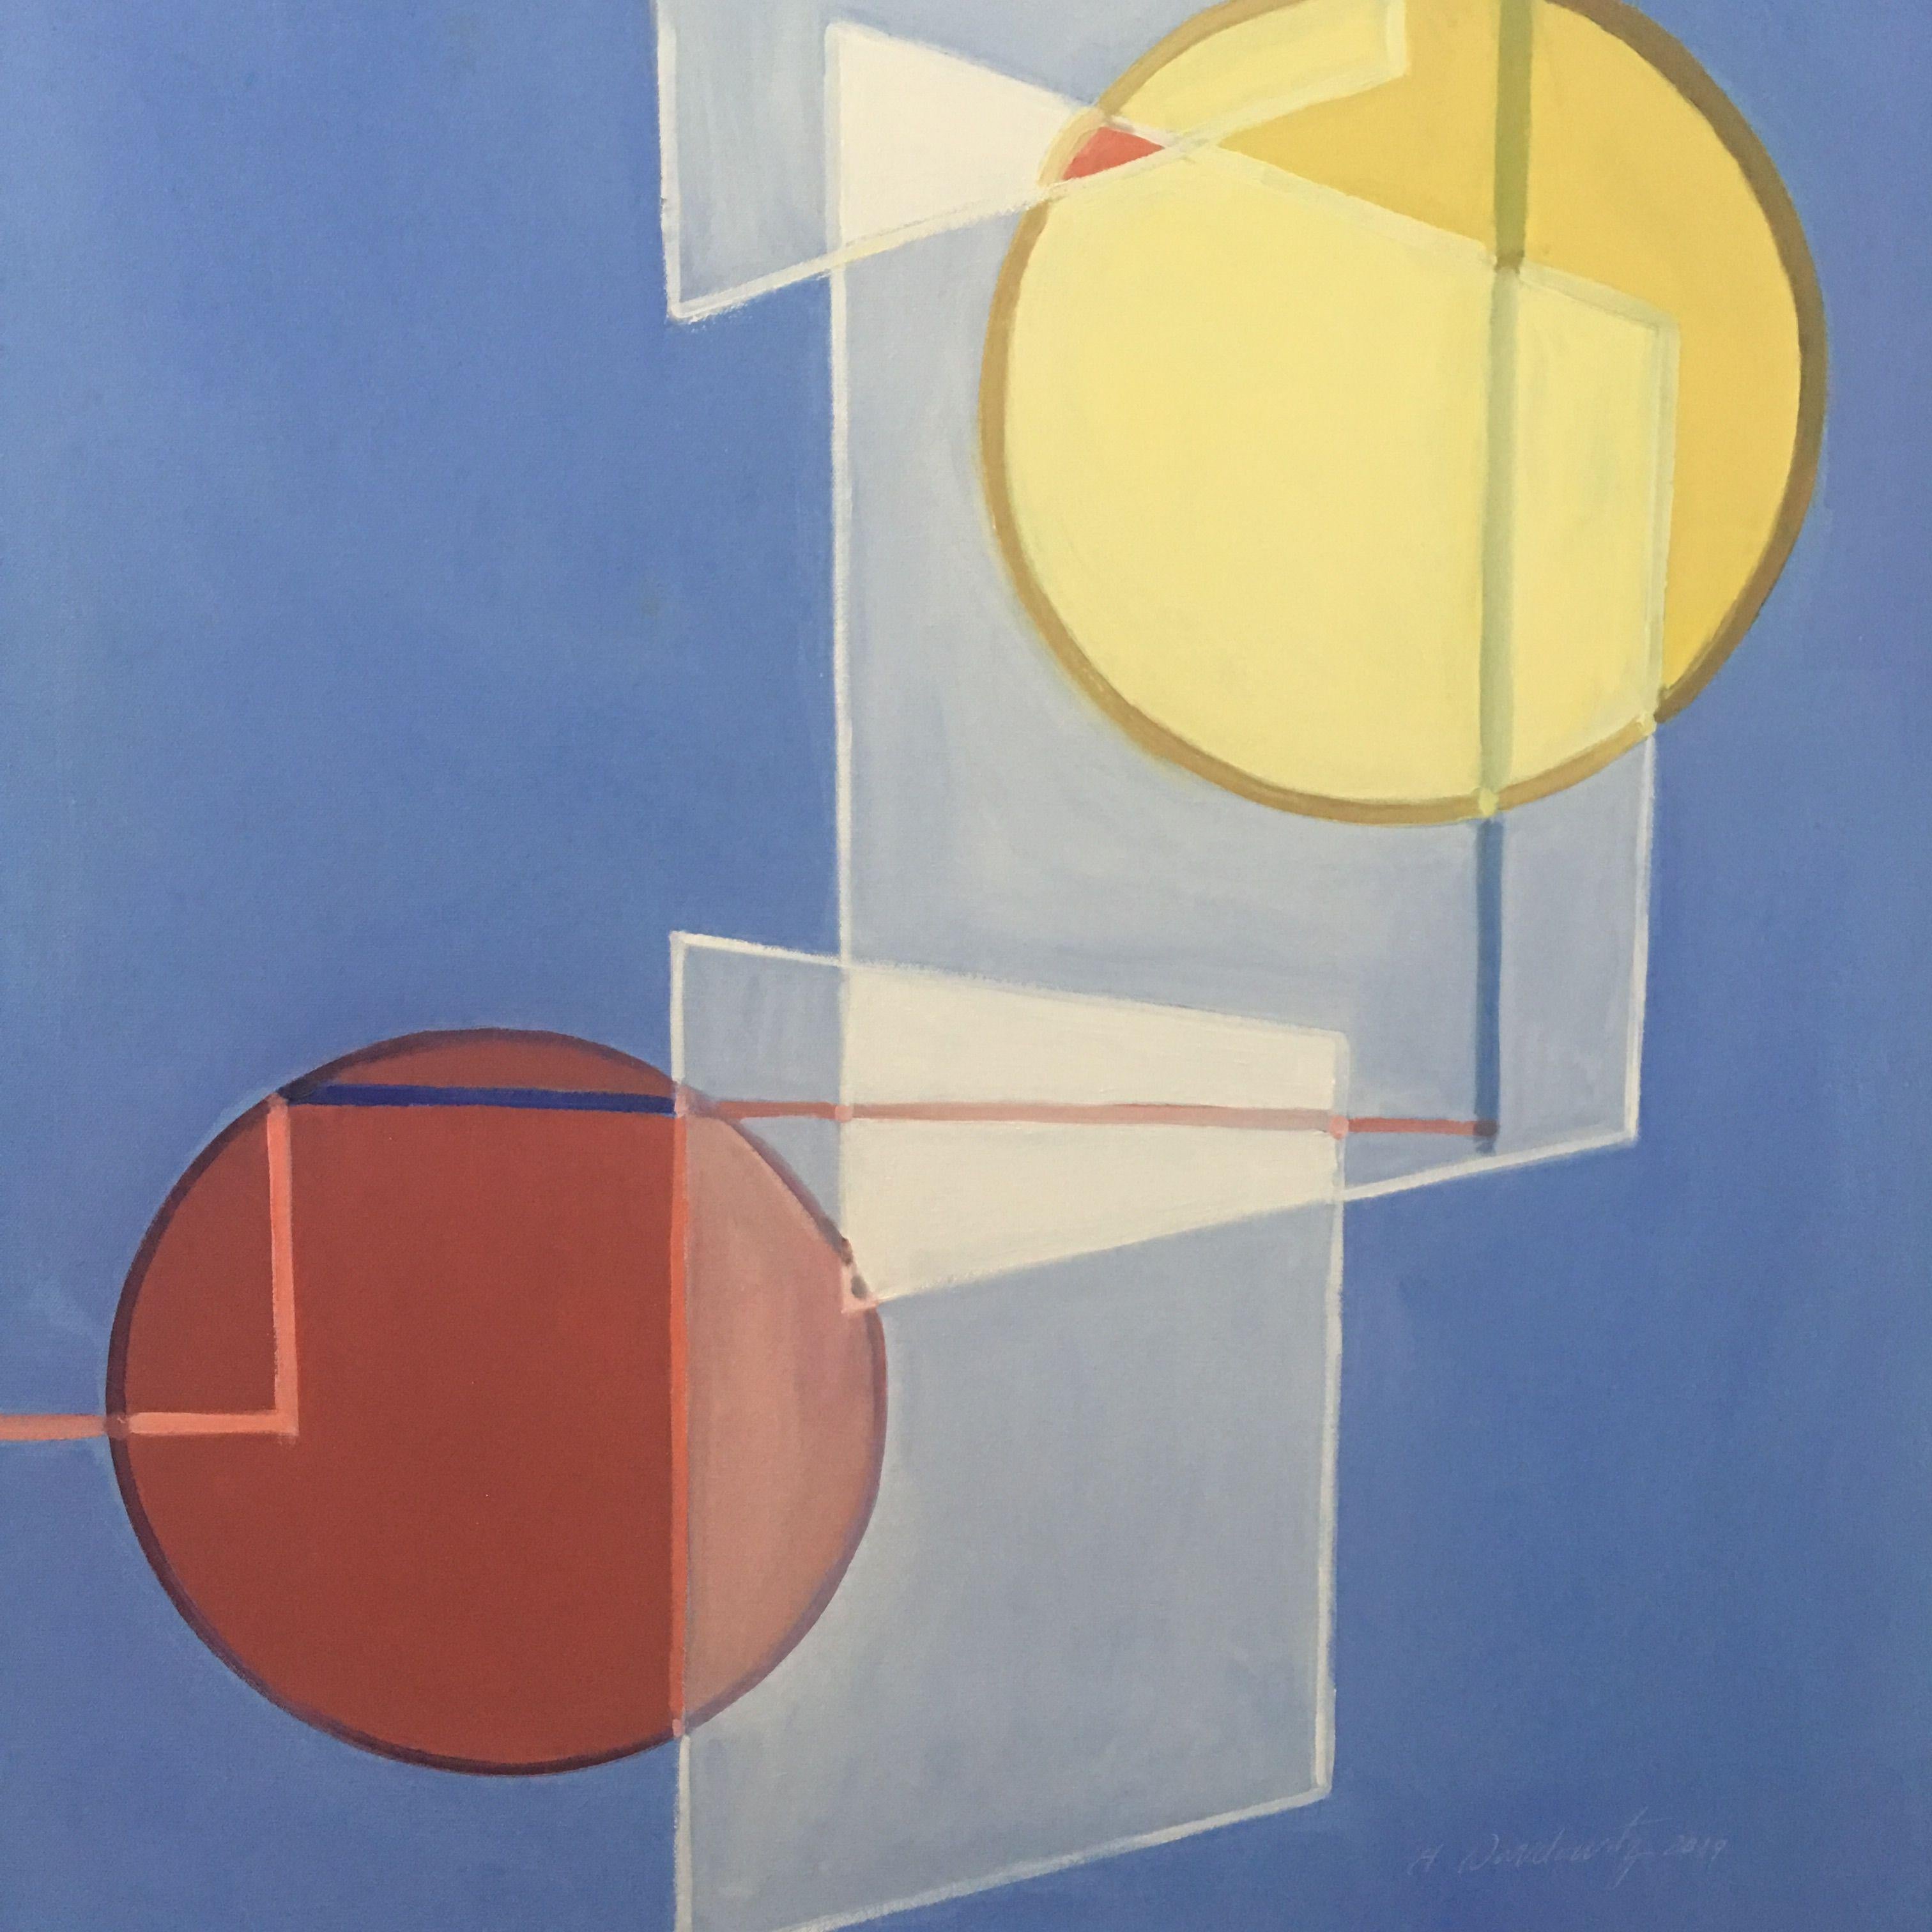 Three Spheres shows the relationship between three primary colored circles against a blue background. :: Painting :: Abstract :: This piece comes with an official certificate of authenticity signed by the artist :: Ready to Hang: Yes :: Signed: Yes